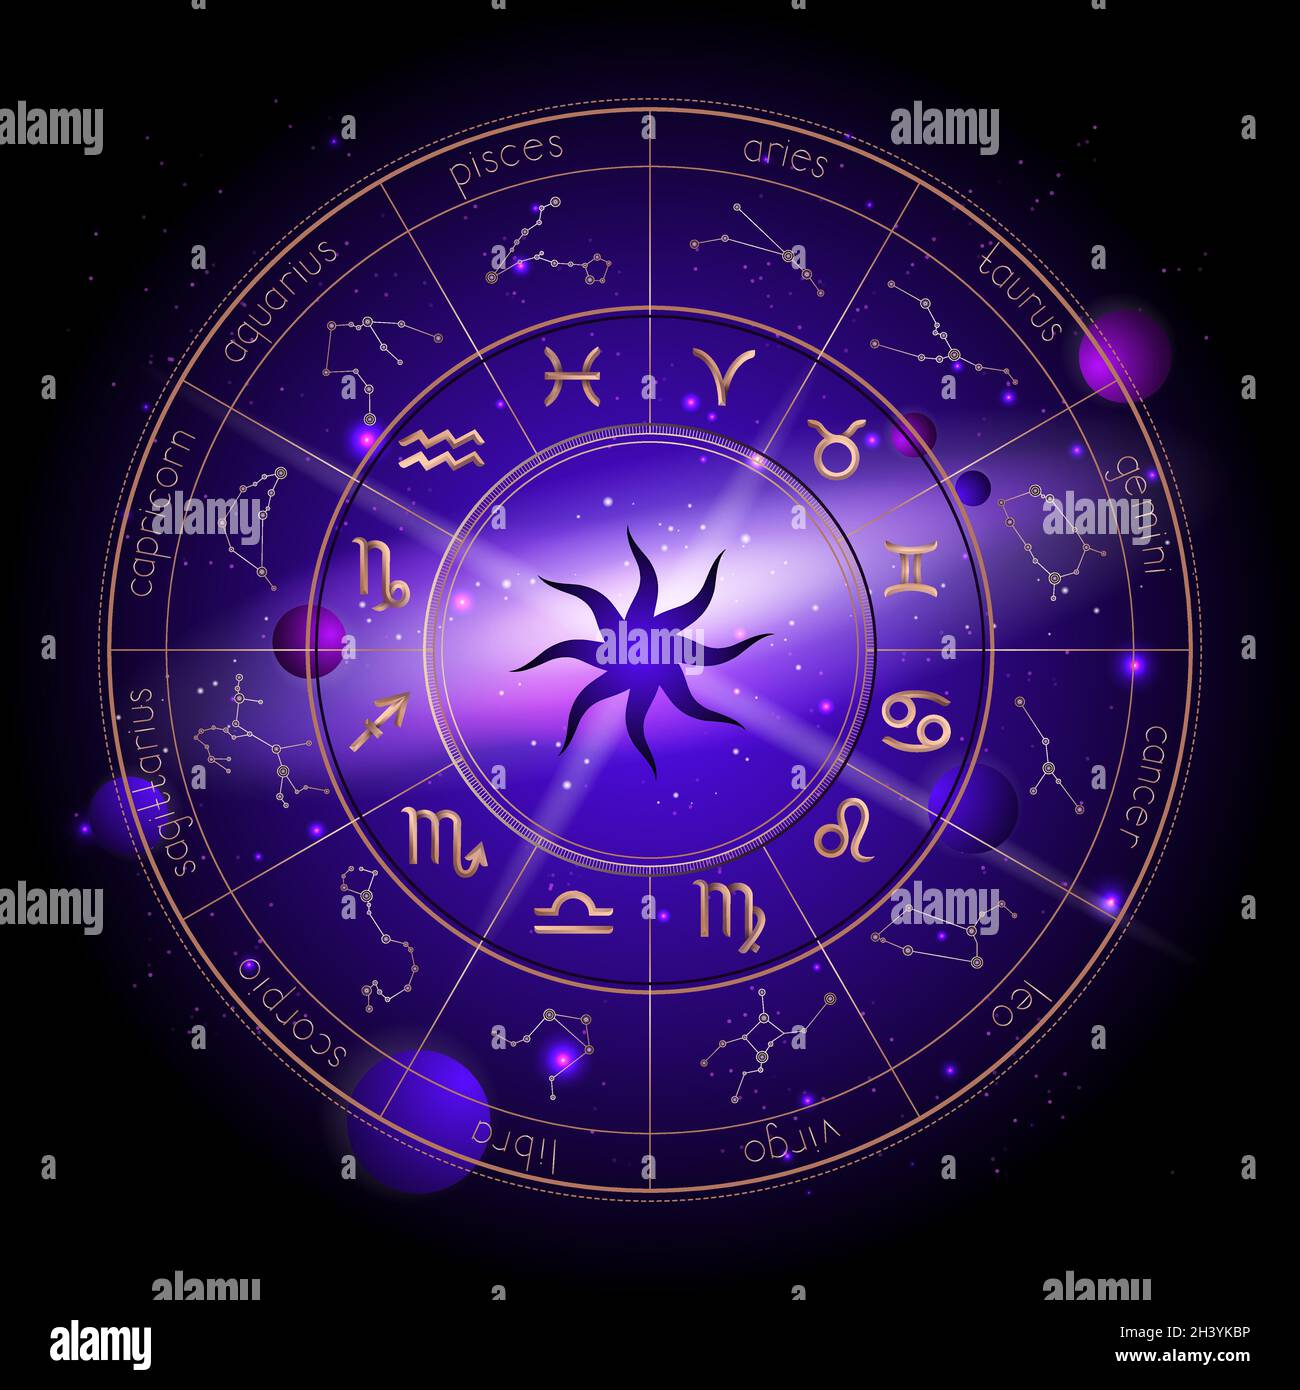 Vector illustration of Horoscope circle, Zodiac signs and pictograms astrology planets against the space background with planets, stars and geometry p Stock Vector